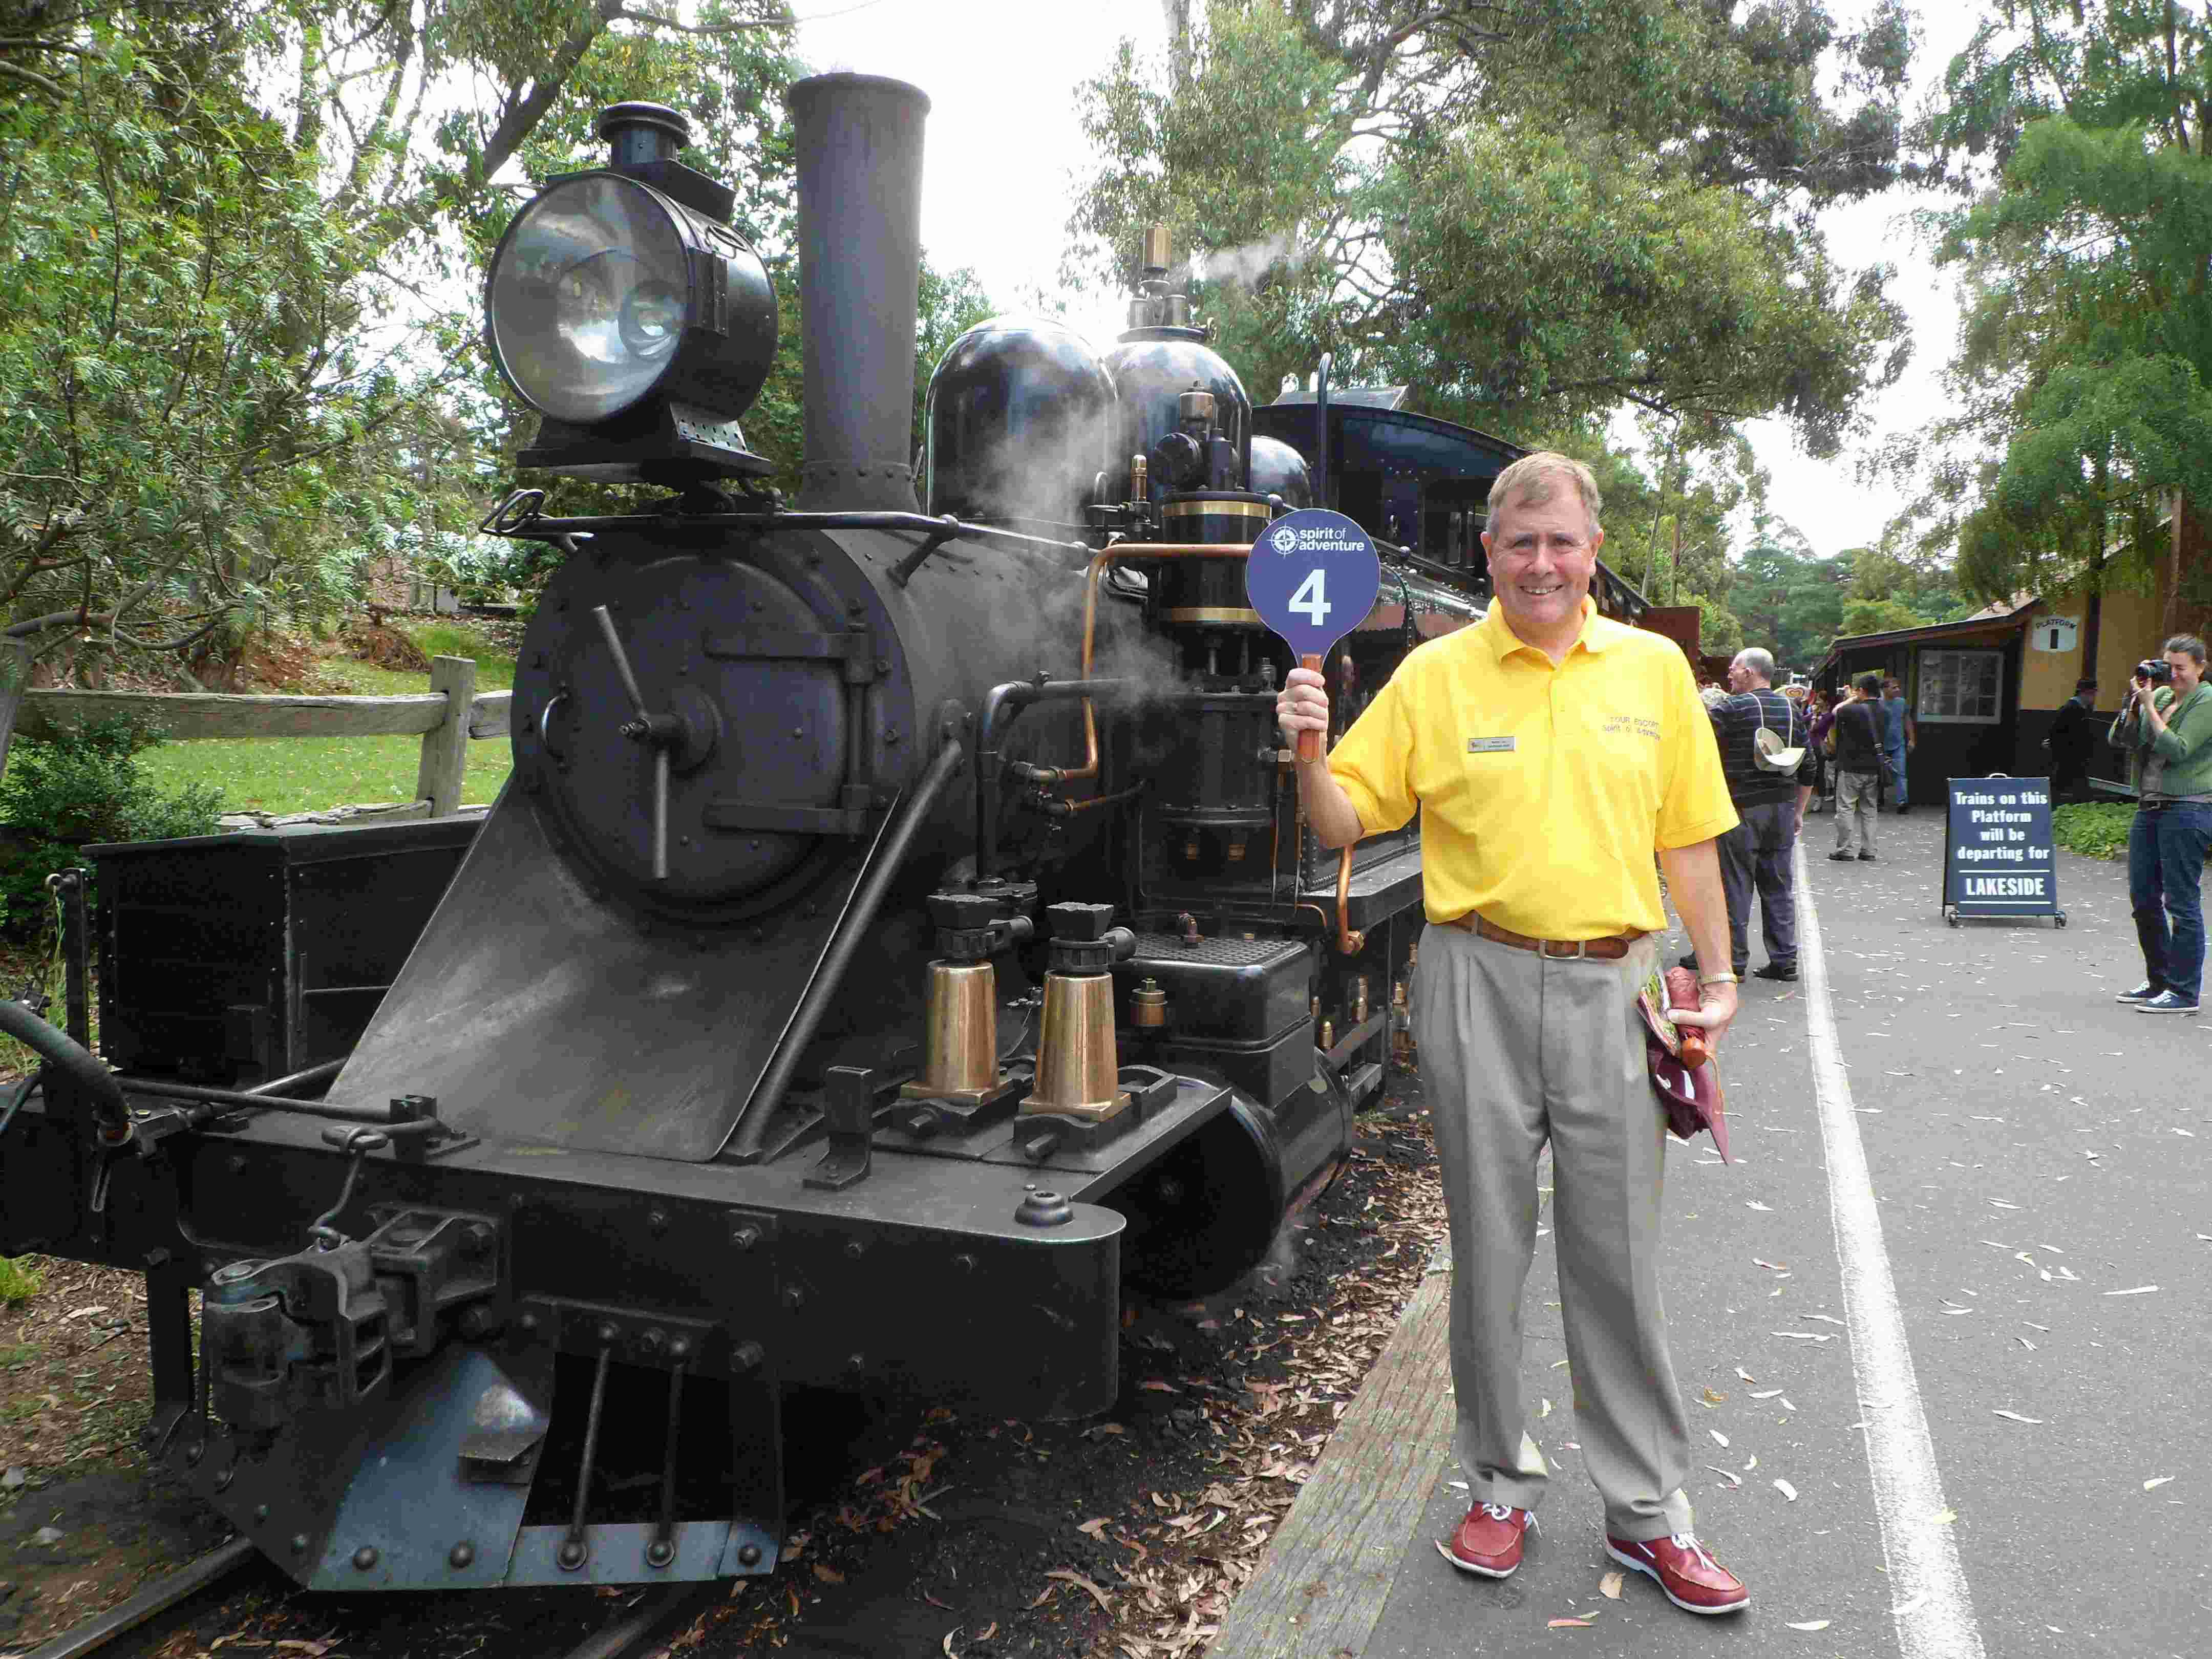 Me with Puffing Billy